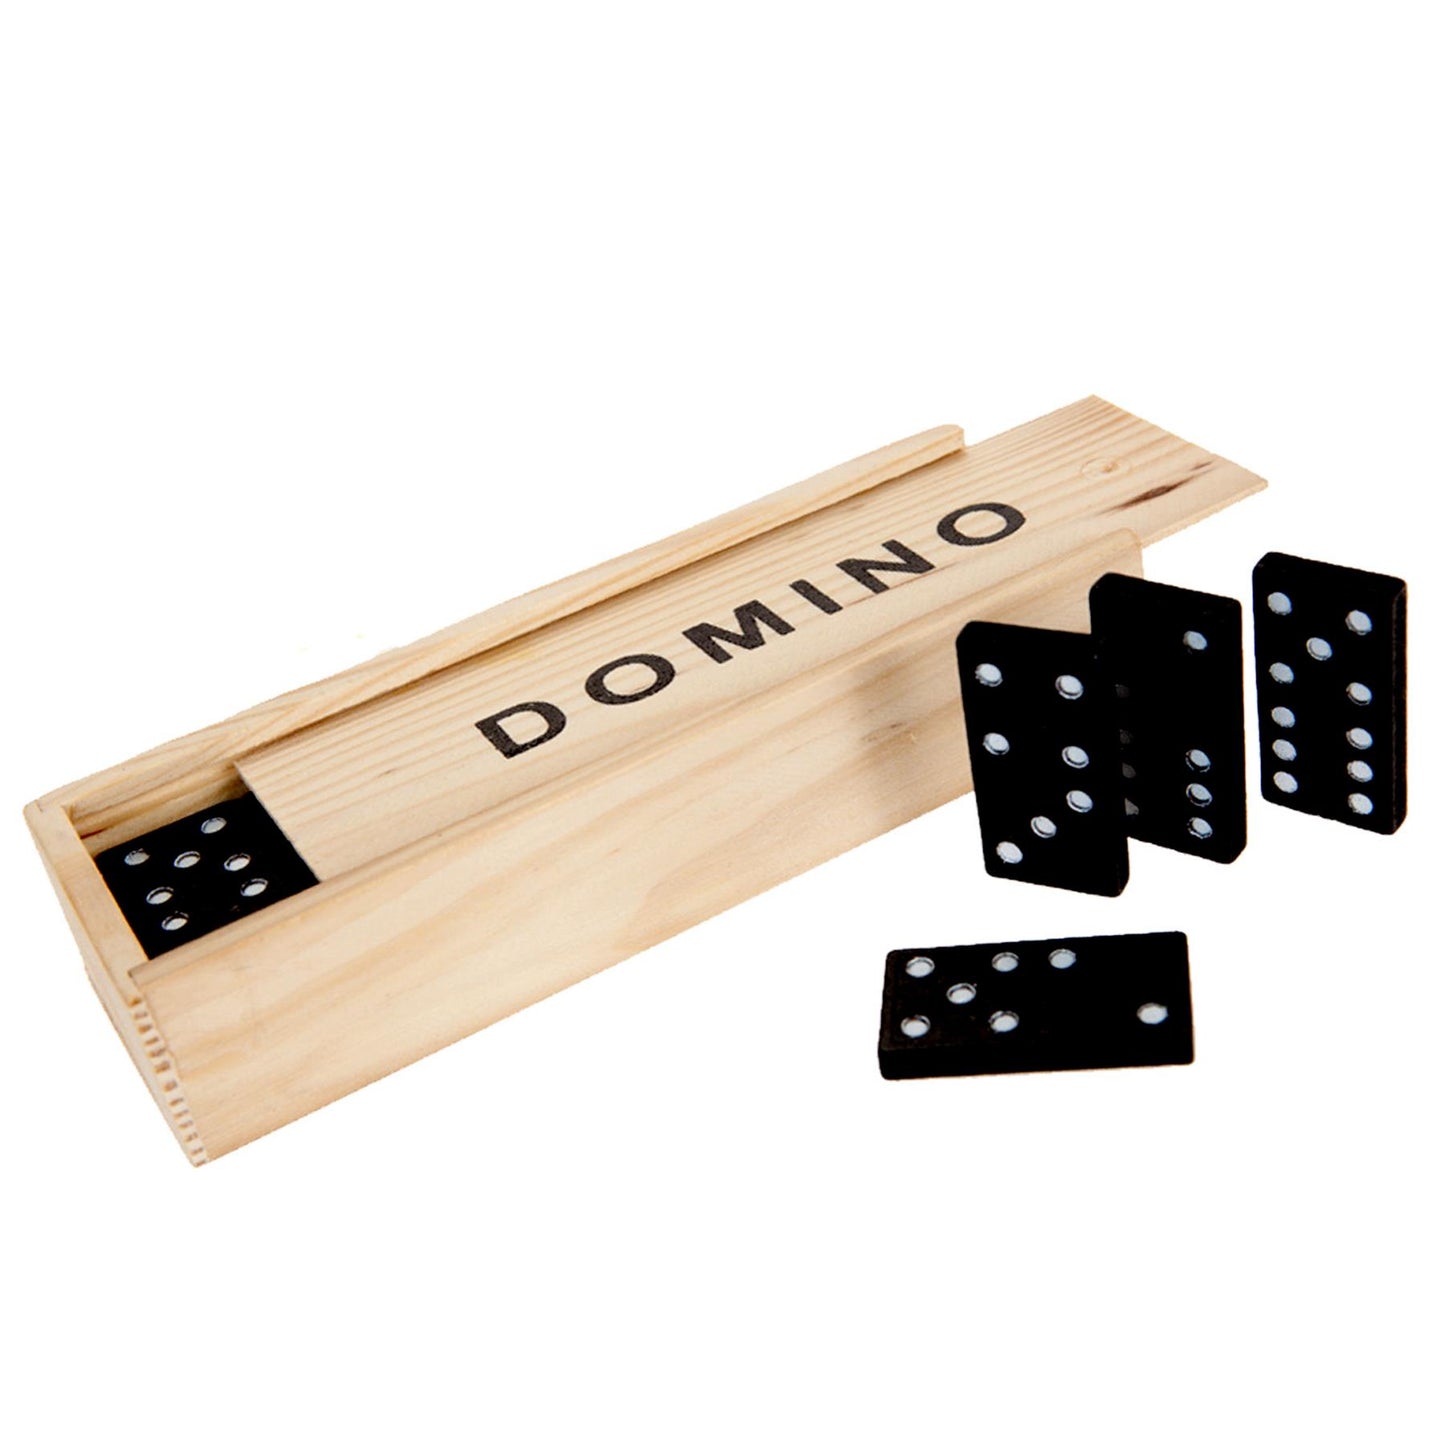 Dominoes Game in Wooden Box by The Magic Toy Shop - UKBuyZone